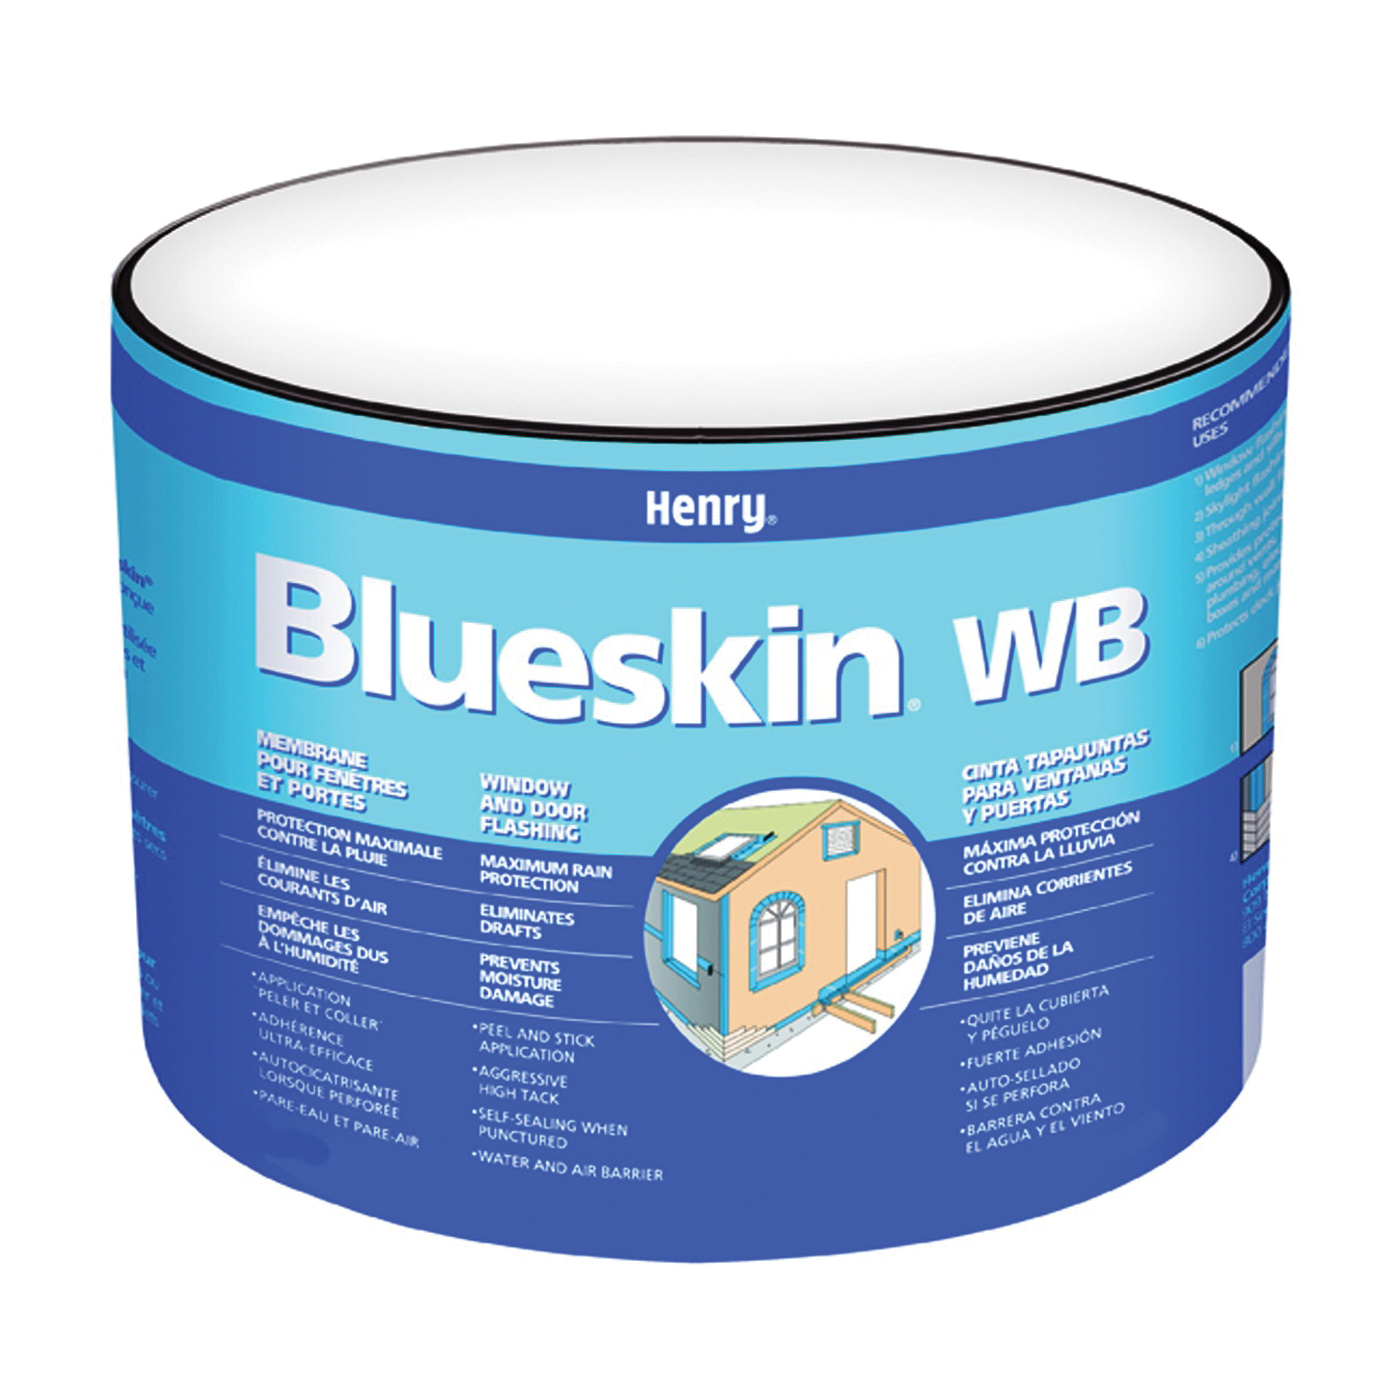 WB25 HE201WB976 Window and Door Flashing, 75 ft L, 12 in W, Paper, Blue, Self-Adhesive